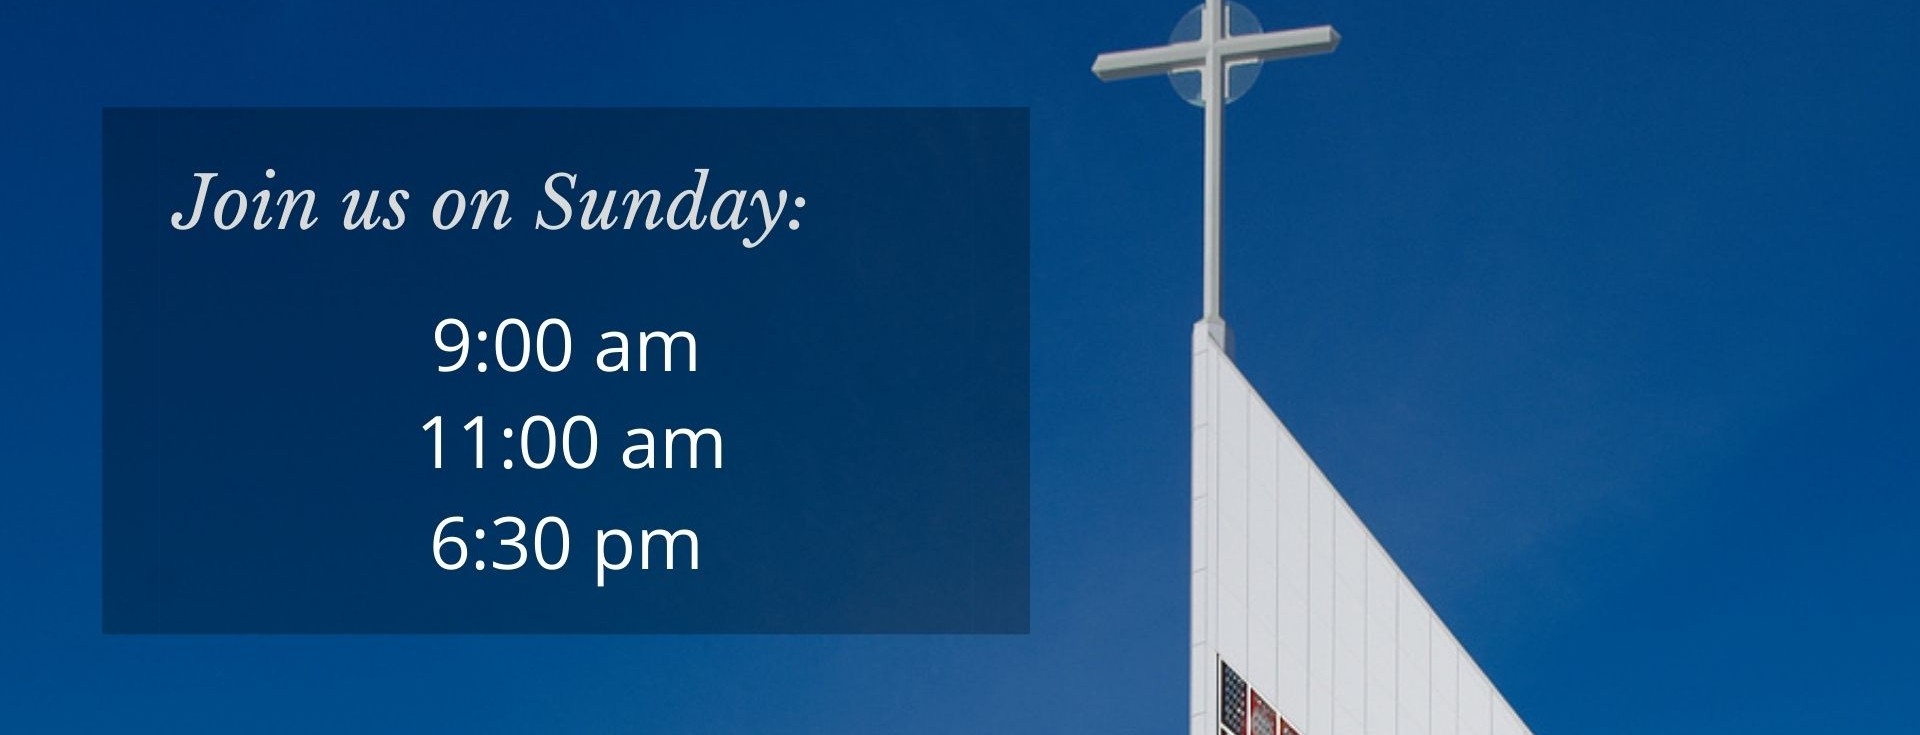 Join Us Sunday (2021)